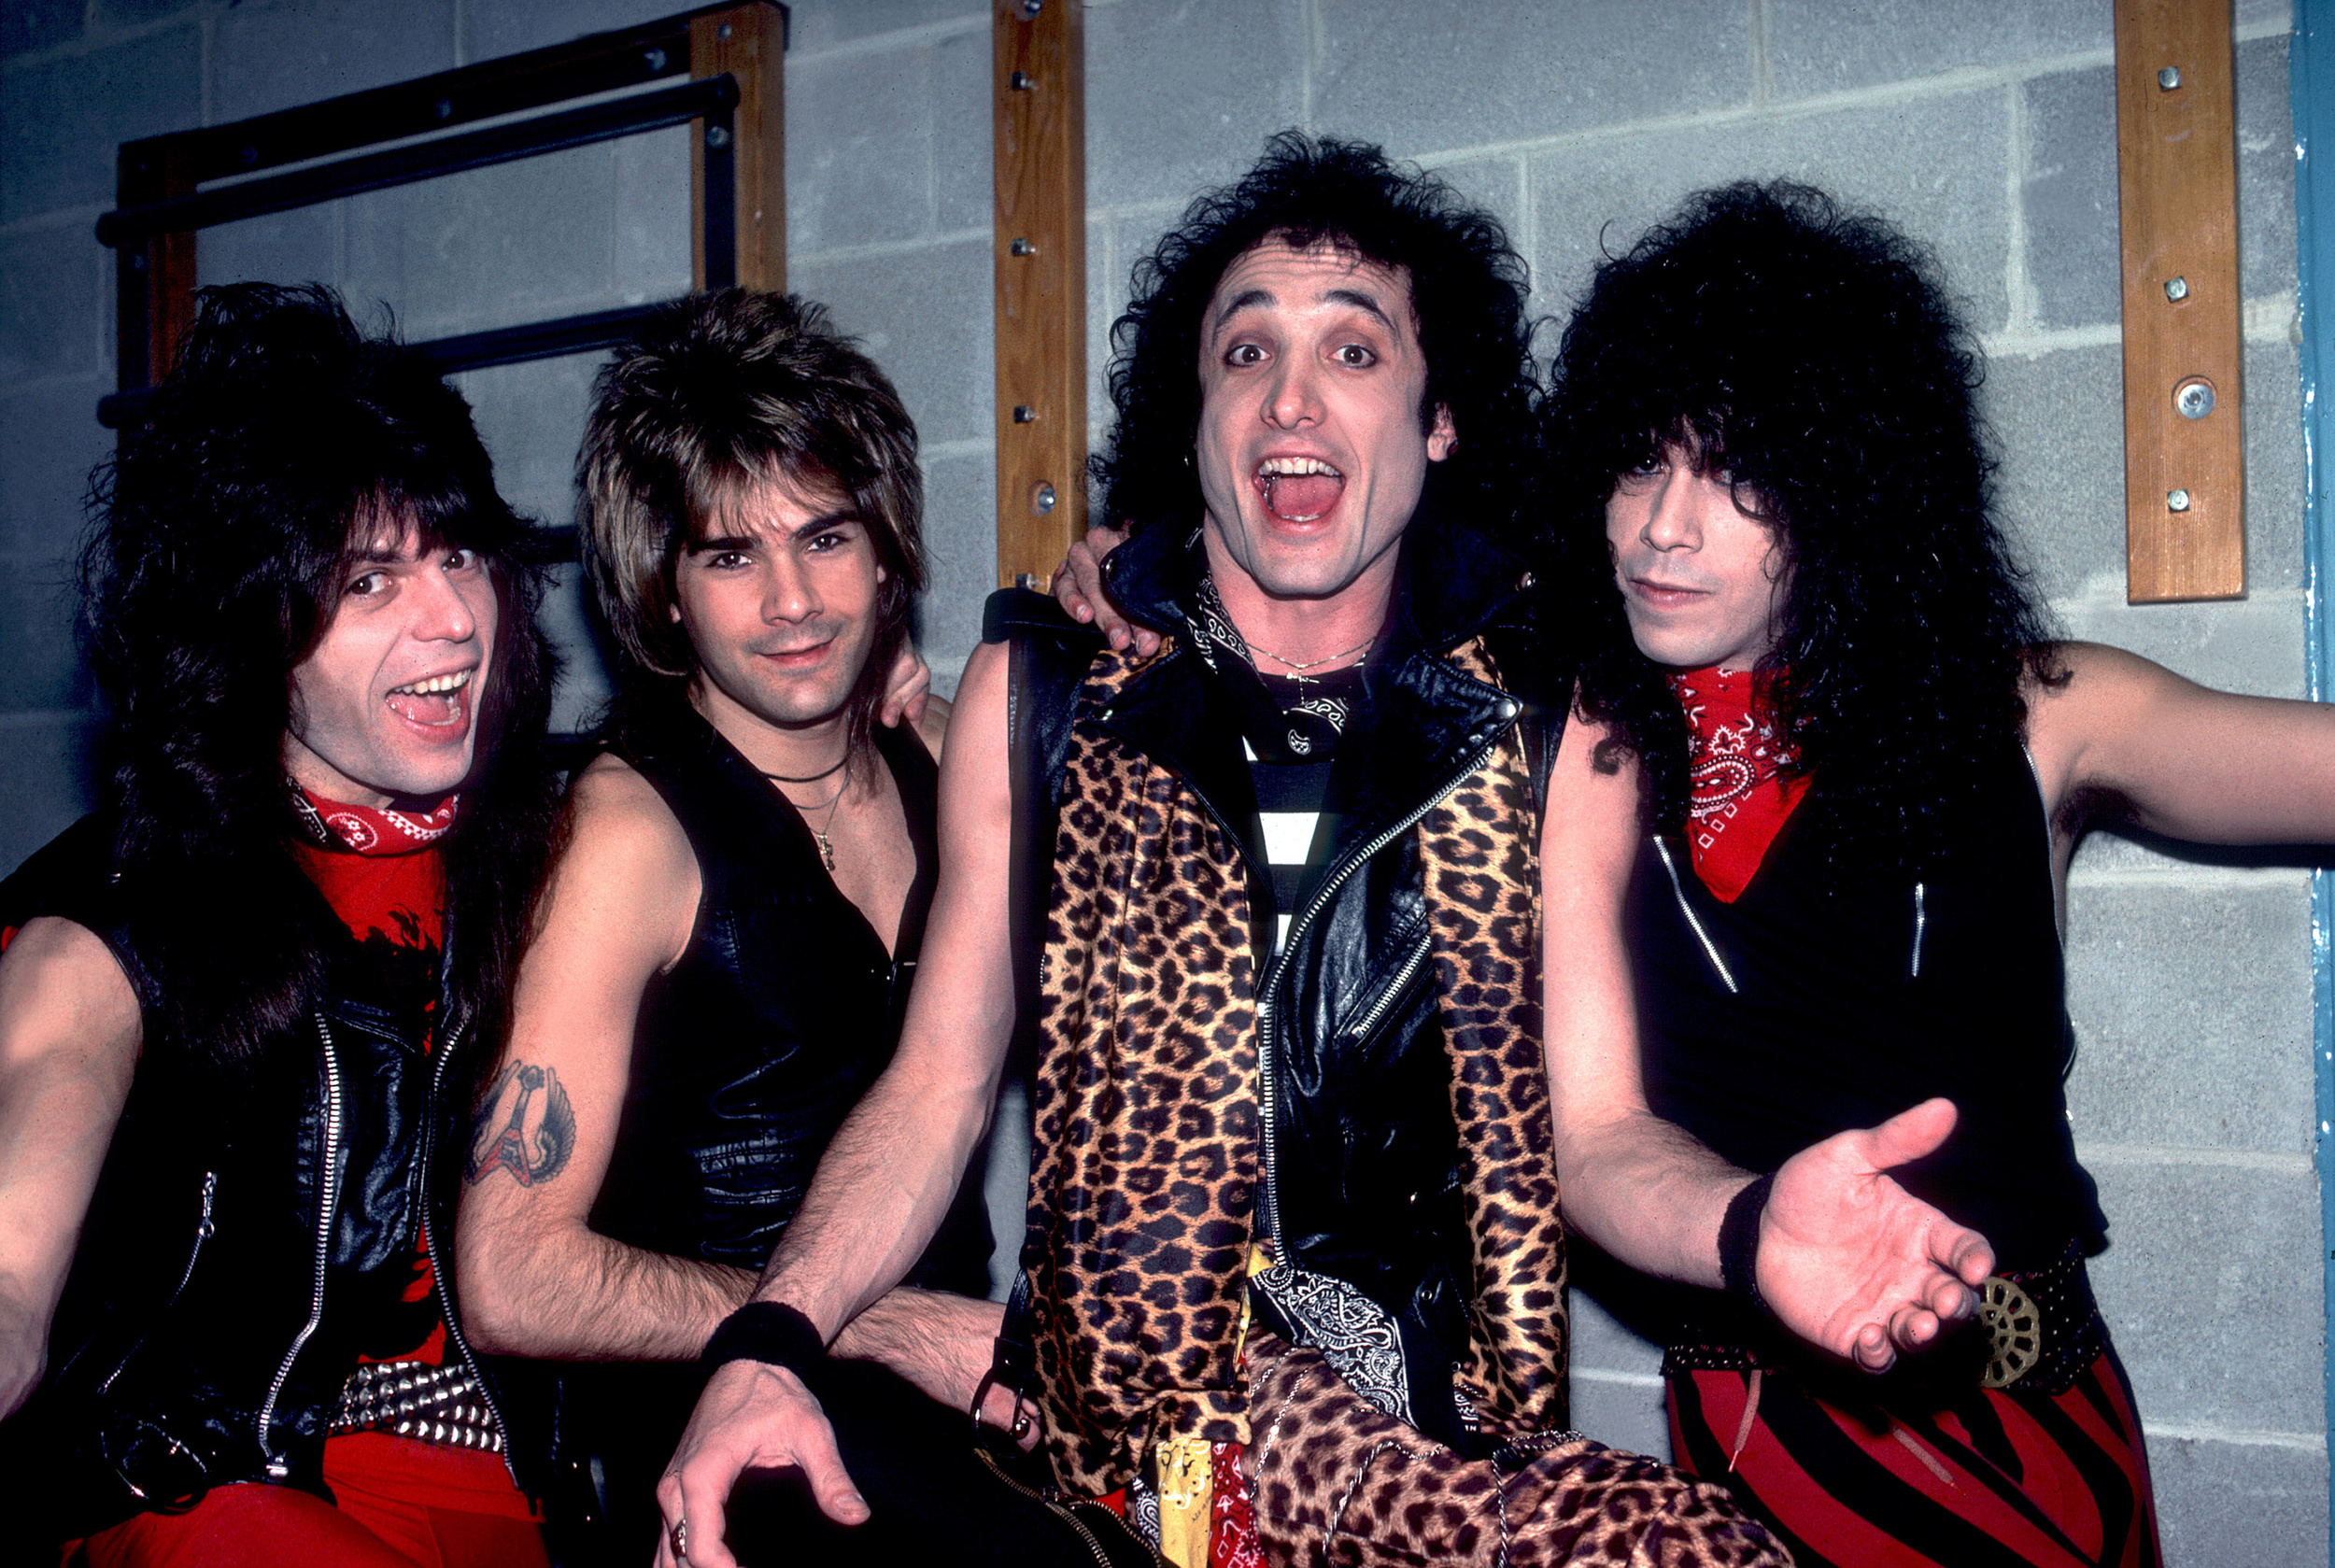 <p>Co-founded initially by late metal guitar virtuoso Randy Rhoads, Quiet Riot — sans Rhoads — is often credited with putting hair/glam metal on the mainstream map after 1983's <em>Metal Health</em> became the first metal album to reach No. 1 on the Billboard chart. The jewel of that release was a cover of the Slade track "Cūm On Feel the Noize." However, the title track was a quality original.</p><p><a href='https://www.msn.com/en-us/community/channel/vid-cj9pqbr0vn9in2b6ddcd8sfgpfq6x6utp44fssrv6mc2gtybw0us'>Follow us on MSN to see more of our exclusive entertainment content.</a></p>